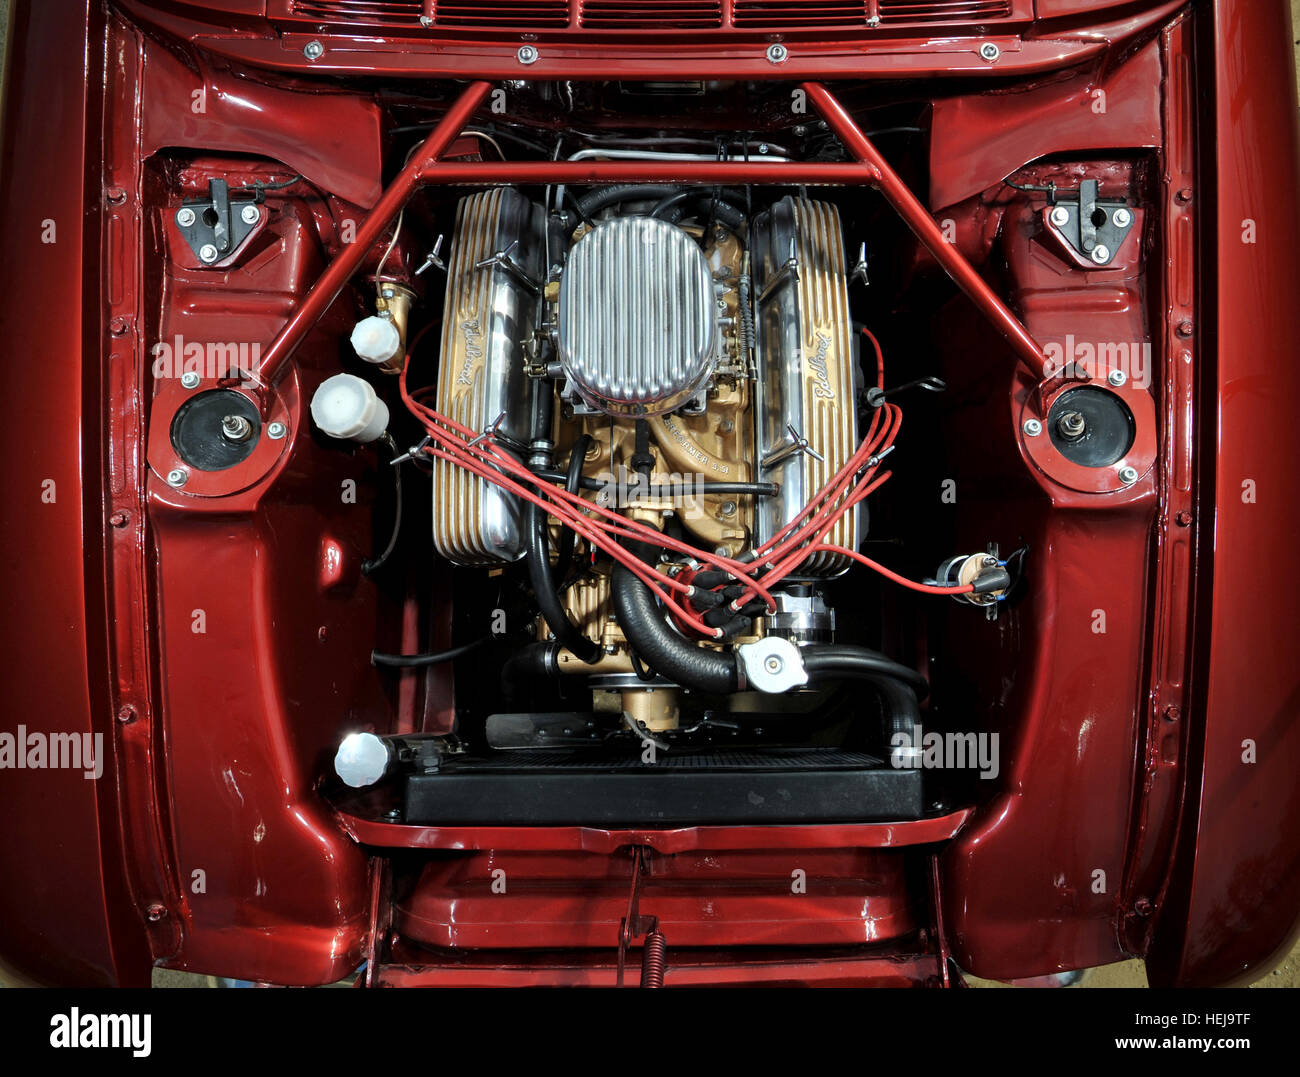 modified Rover V8 engine in a hot rod car Stock Photo